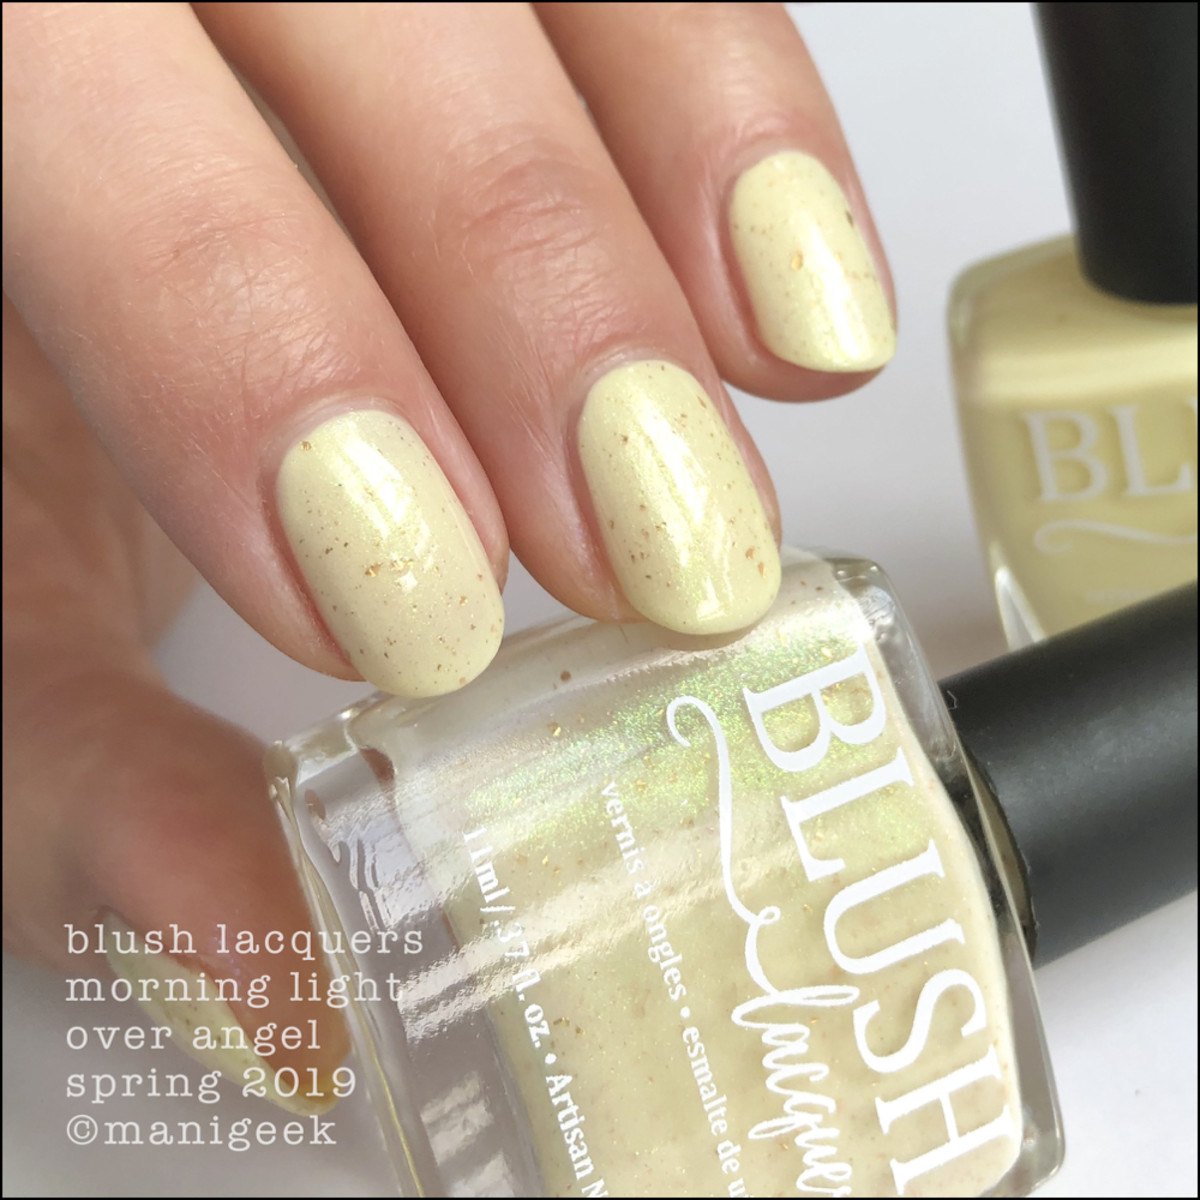 Blush Lacquers Morning Light over Angel - Blush Lacquers Spring 2019